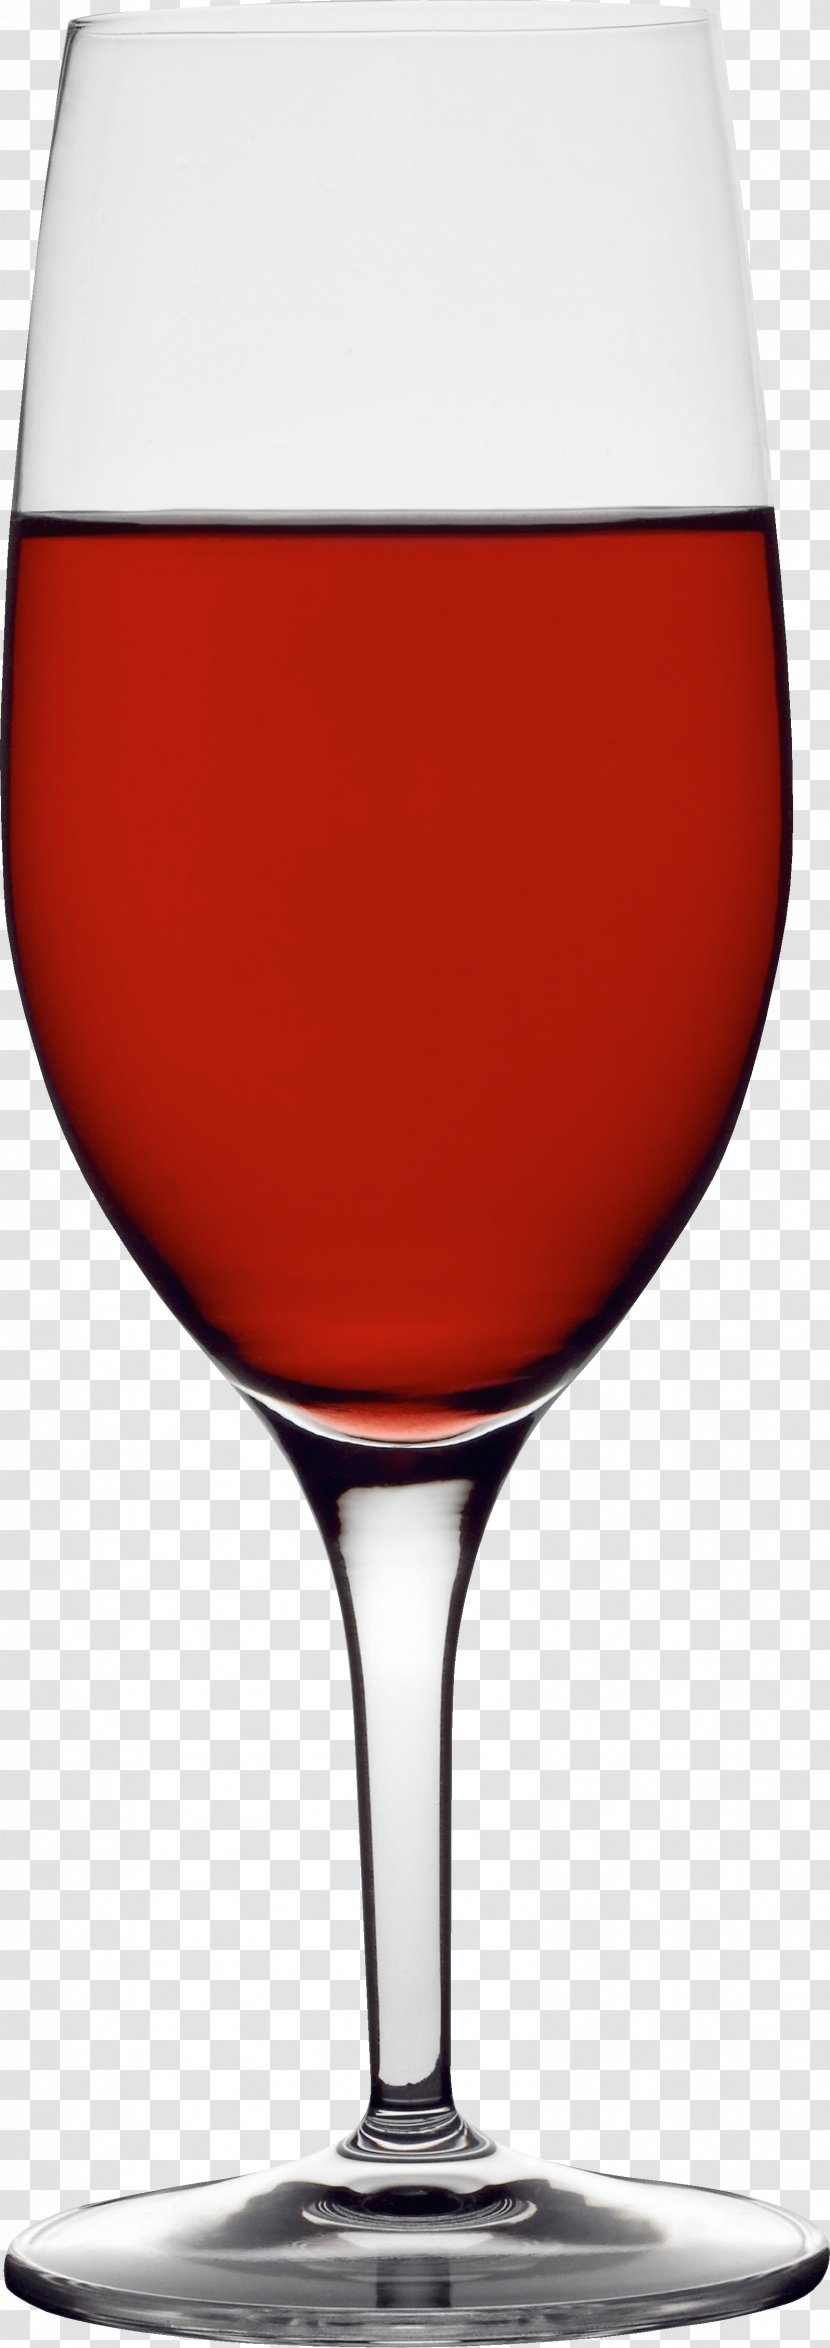 Wine Glass Champagne Image Transparent PNG